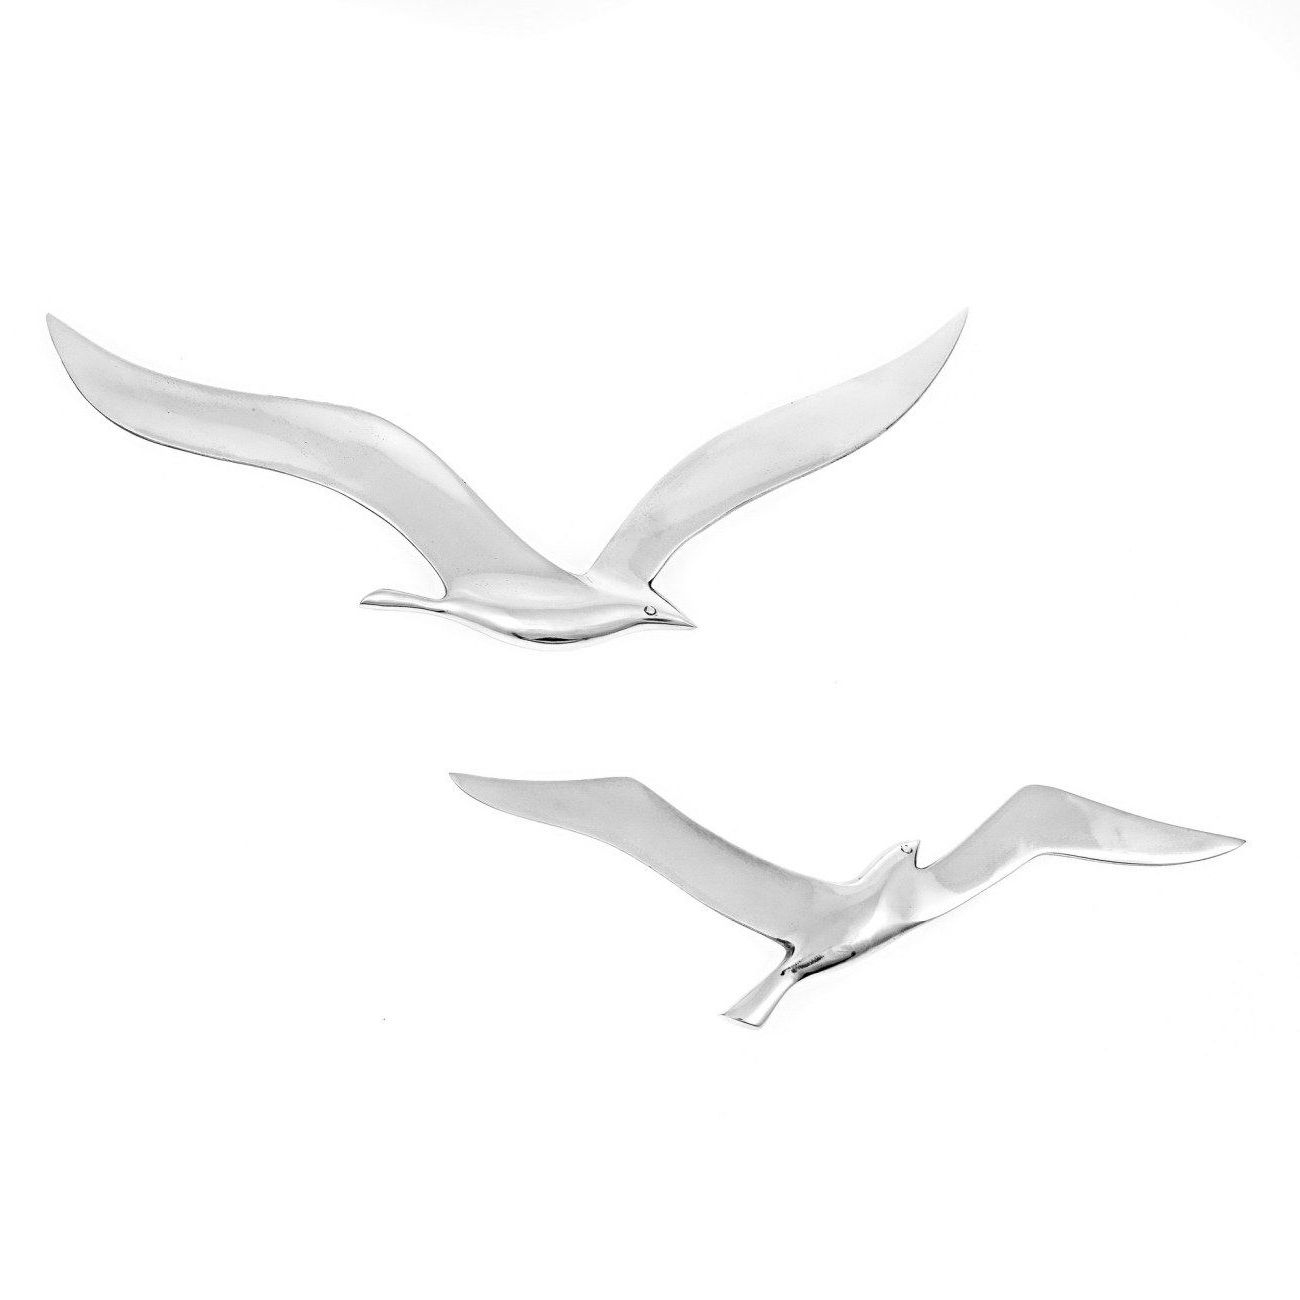 Best And Newest Seagull Bird – Handmade Metal Wall Art Decor – Silver, Large 37cm With Metal Wall Art Flock Of Seagulls (View 15 of 15)